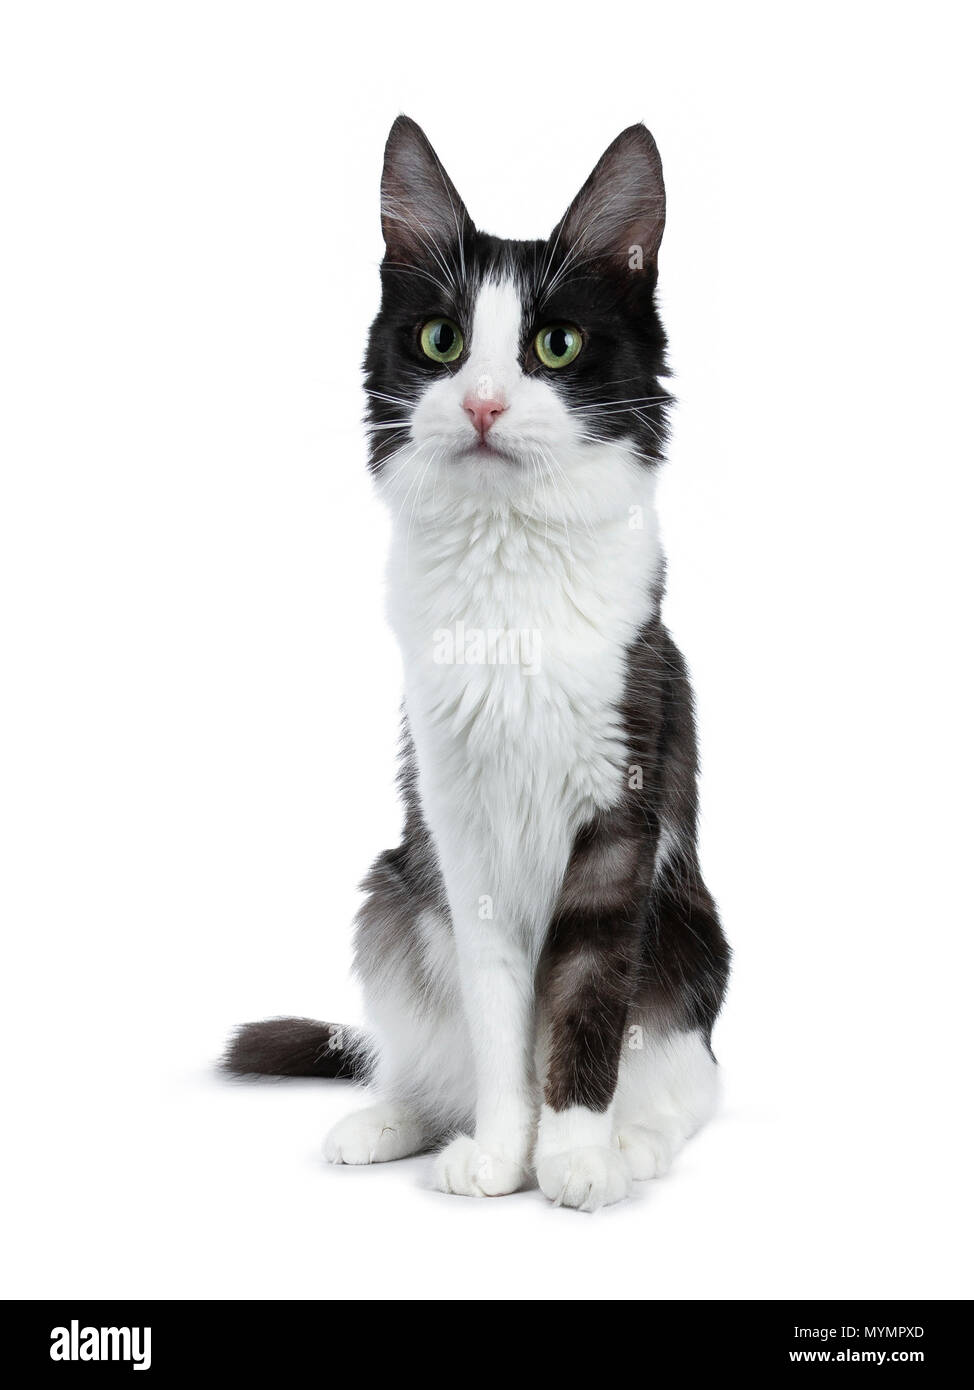 Cute black smoke with white Turkish Angora cat sitting on white background and looking to the side Stock Photo